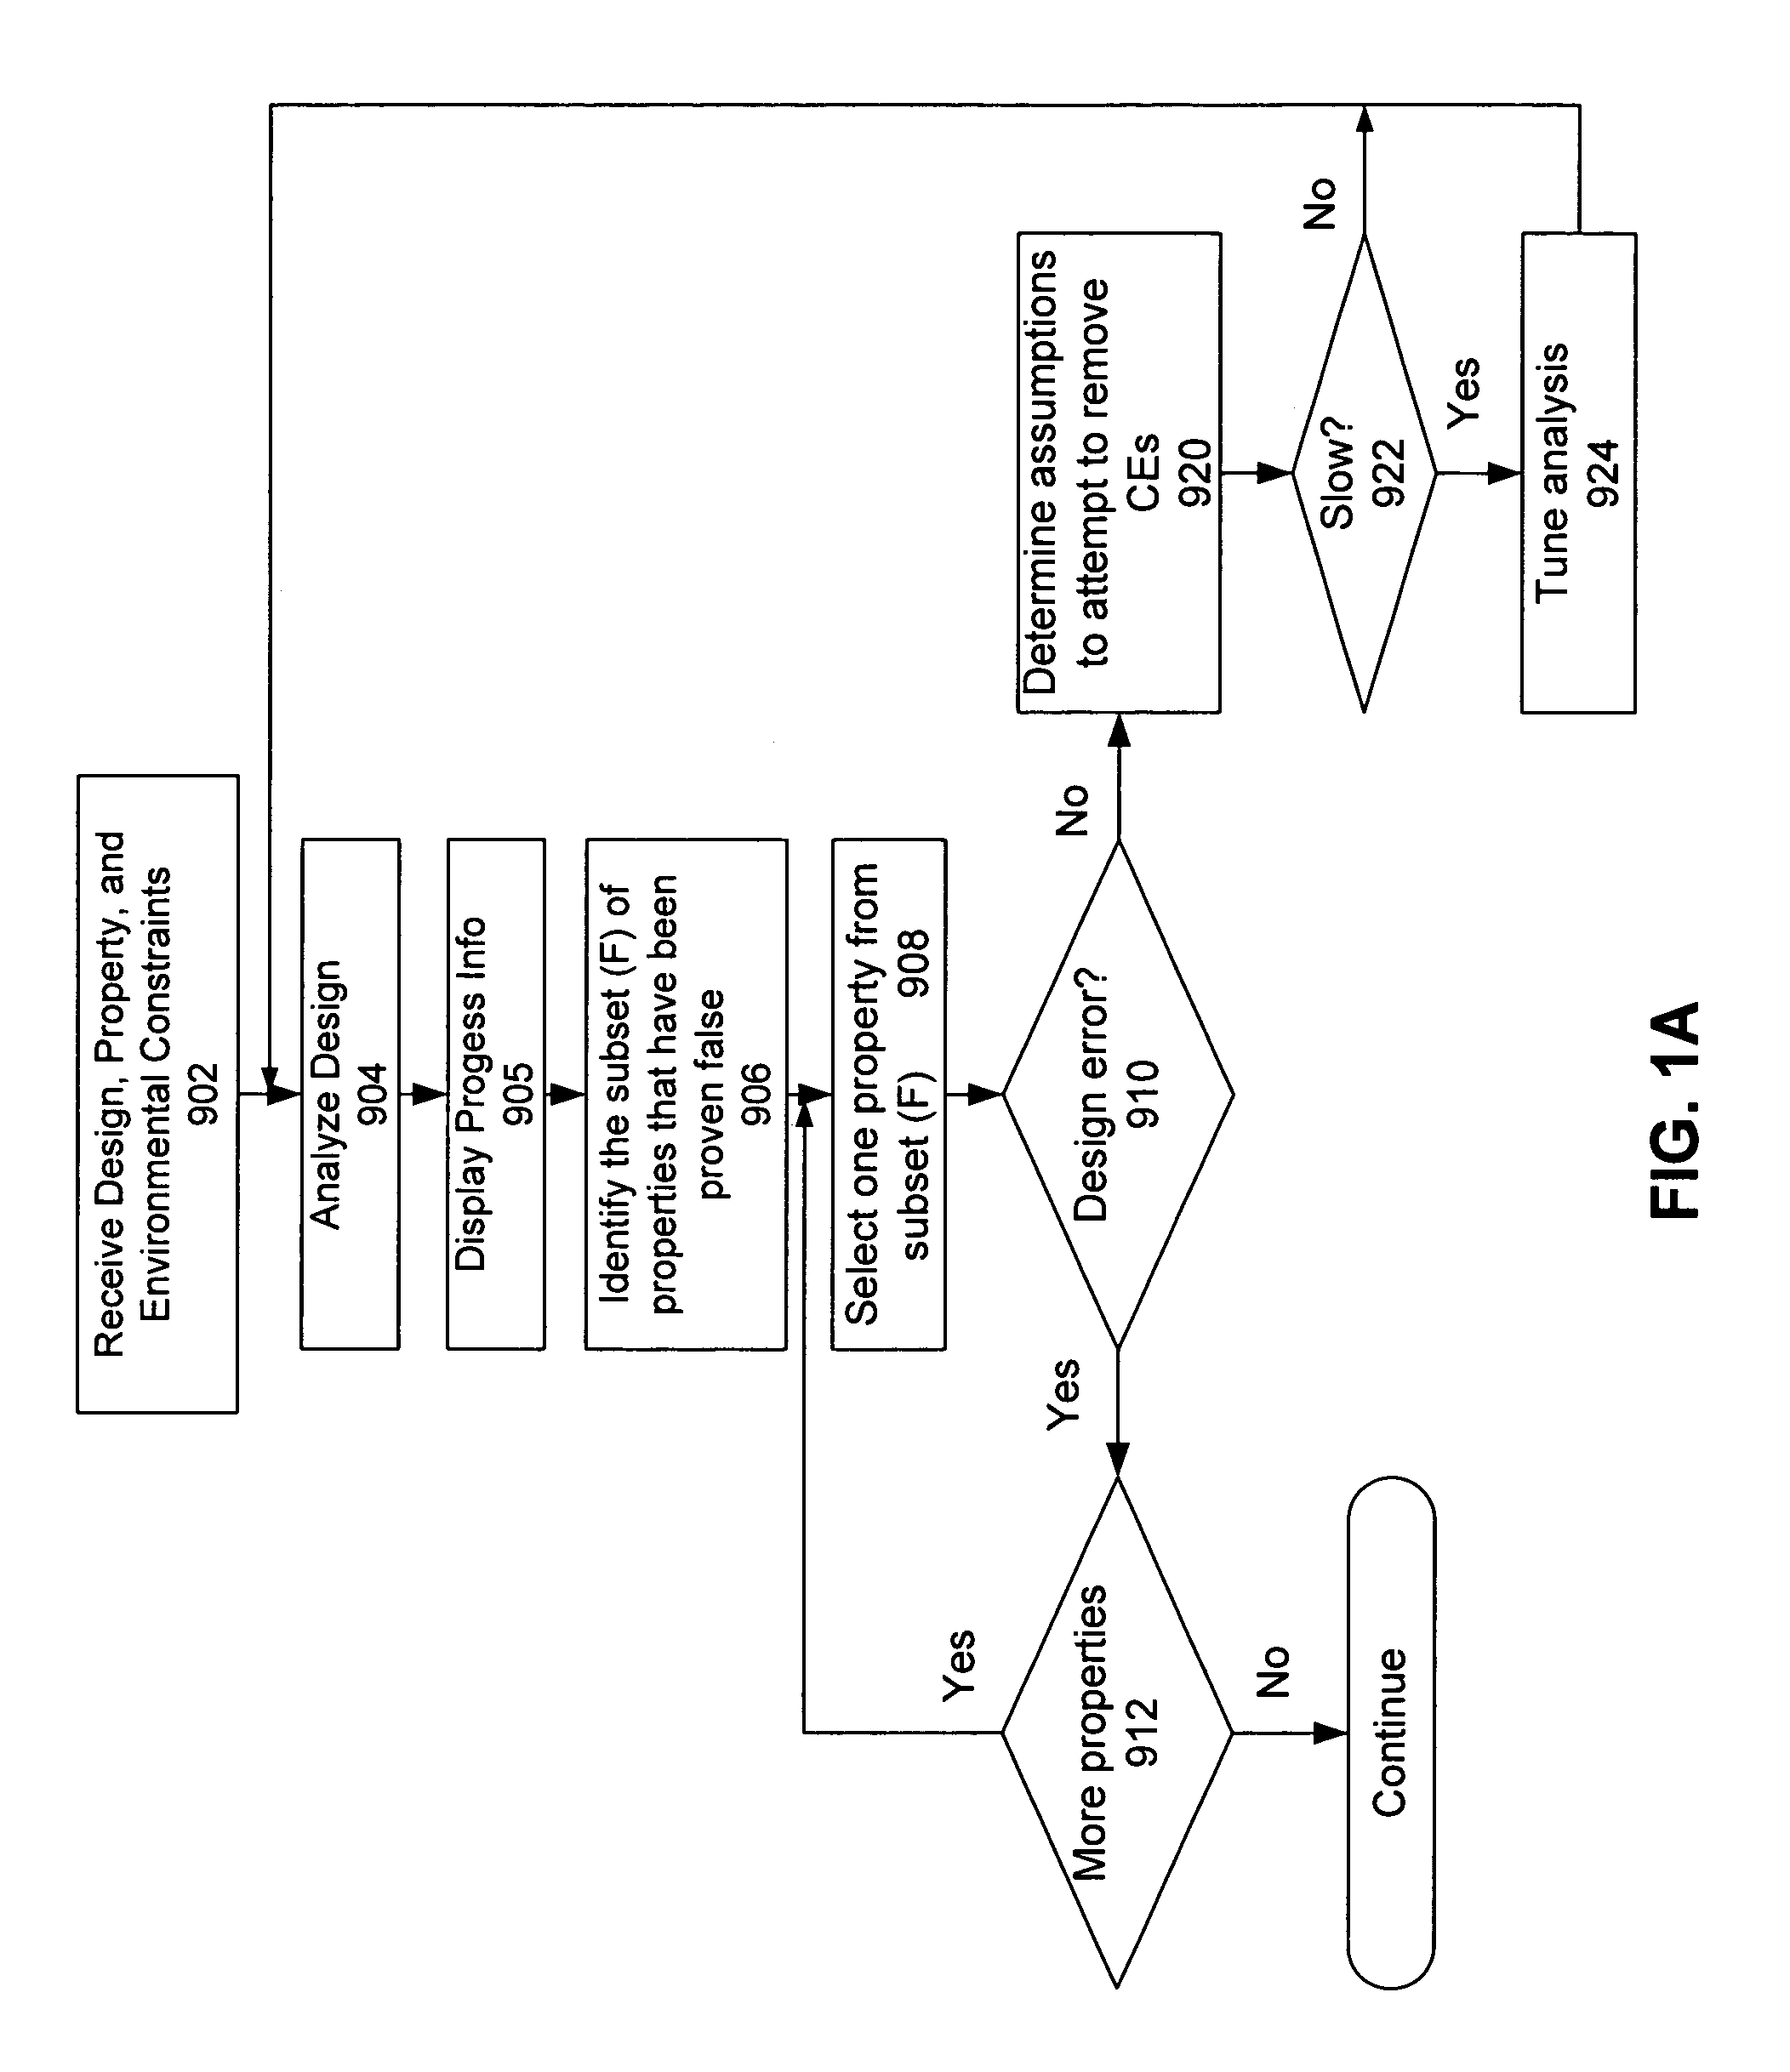 Interactive analysis and debugging of a circuit design during functional verification of the circuit design